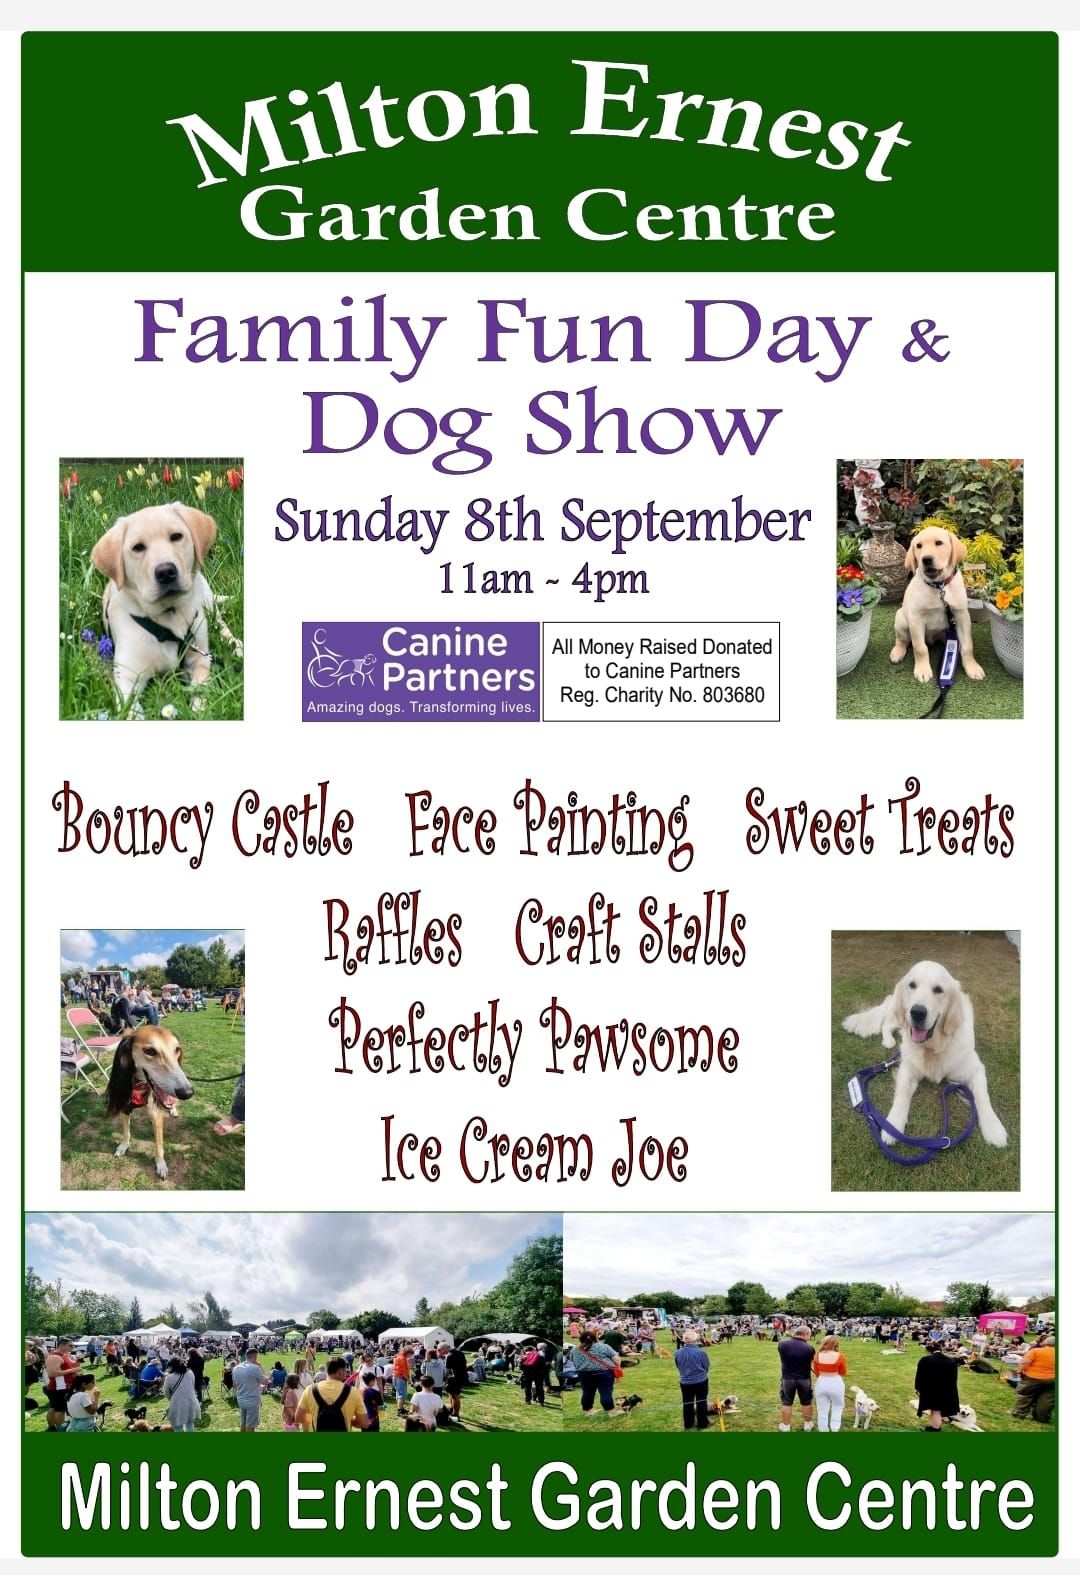 Family Fun Day and Dog Show at MEGC